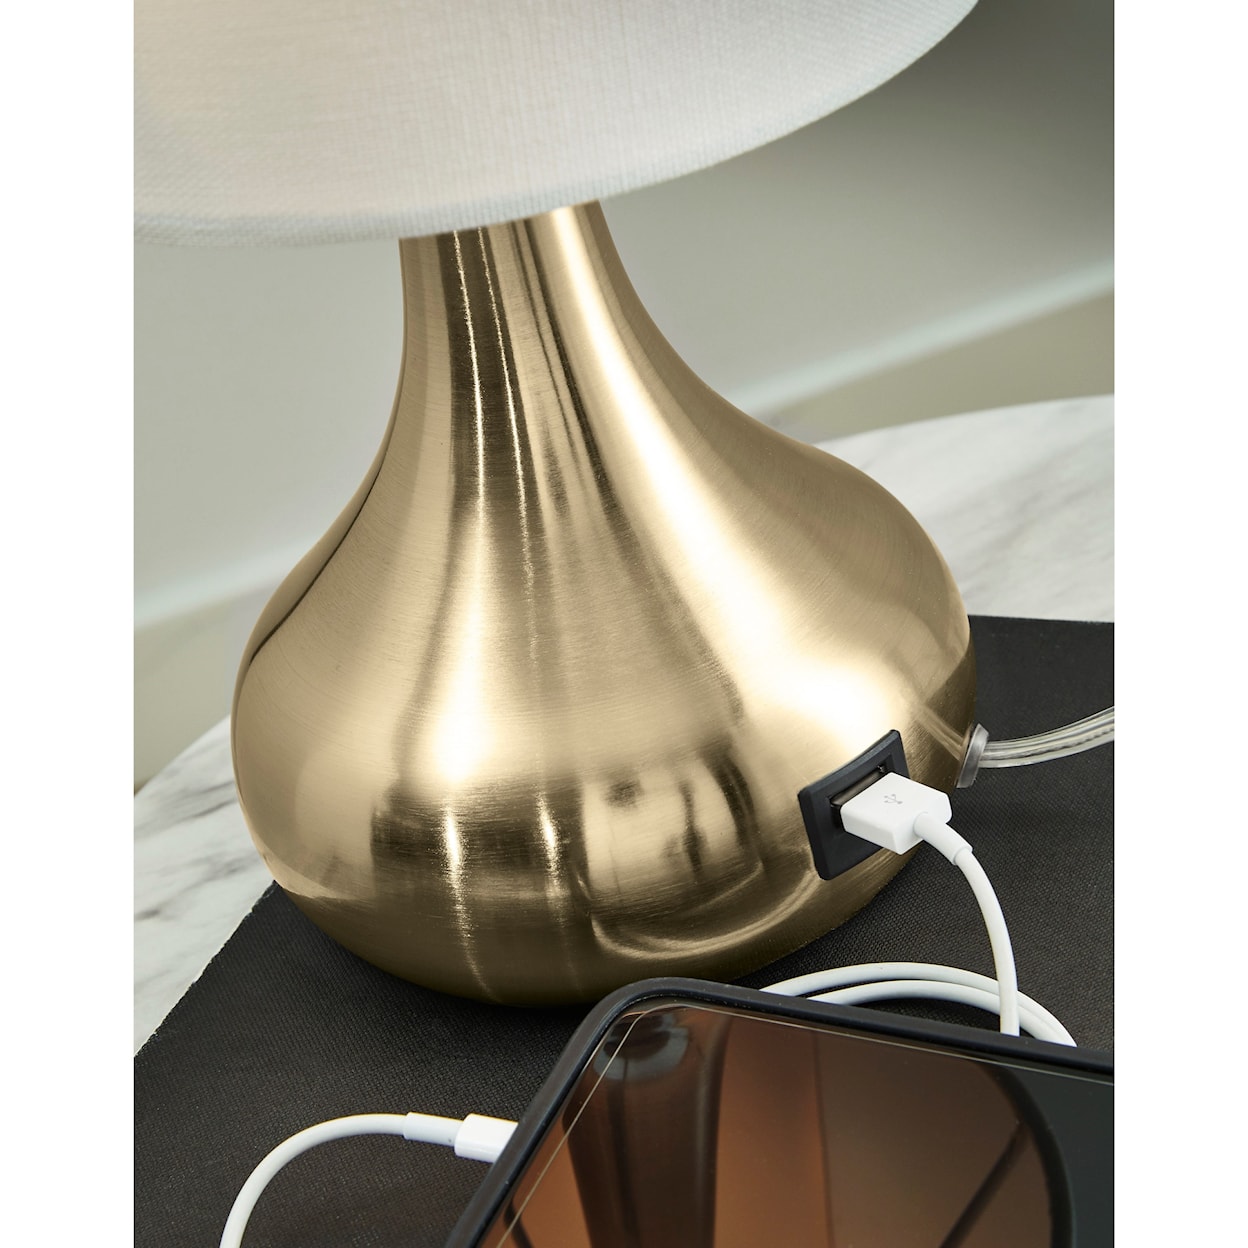 Ashley Furniture Signature Design Lamps - Contemporary Camdale Brass Finish Metal Table Lamp